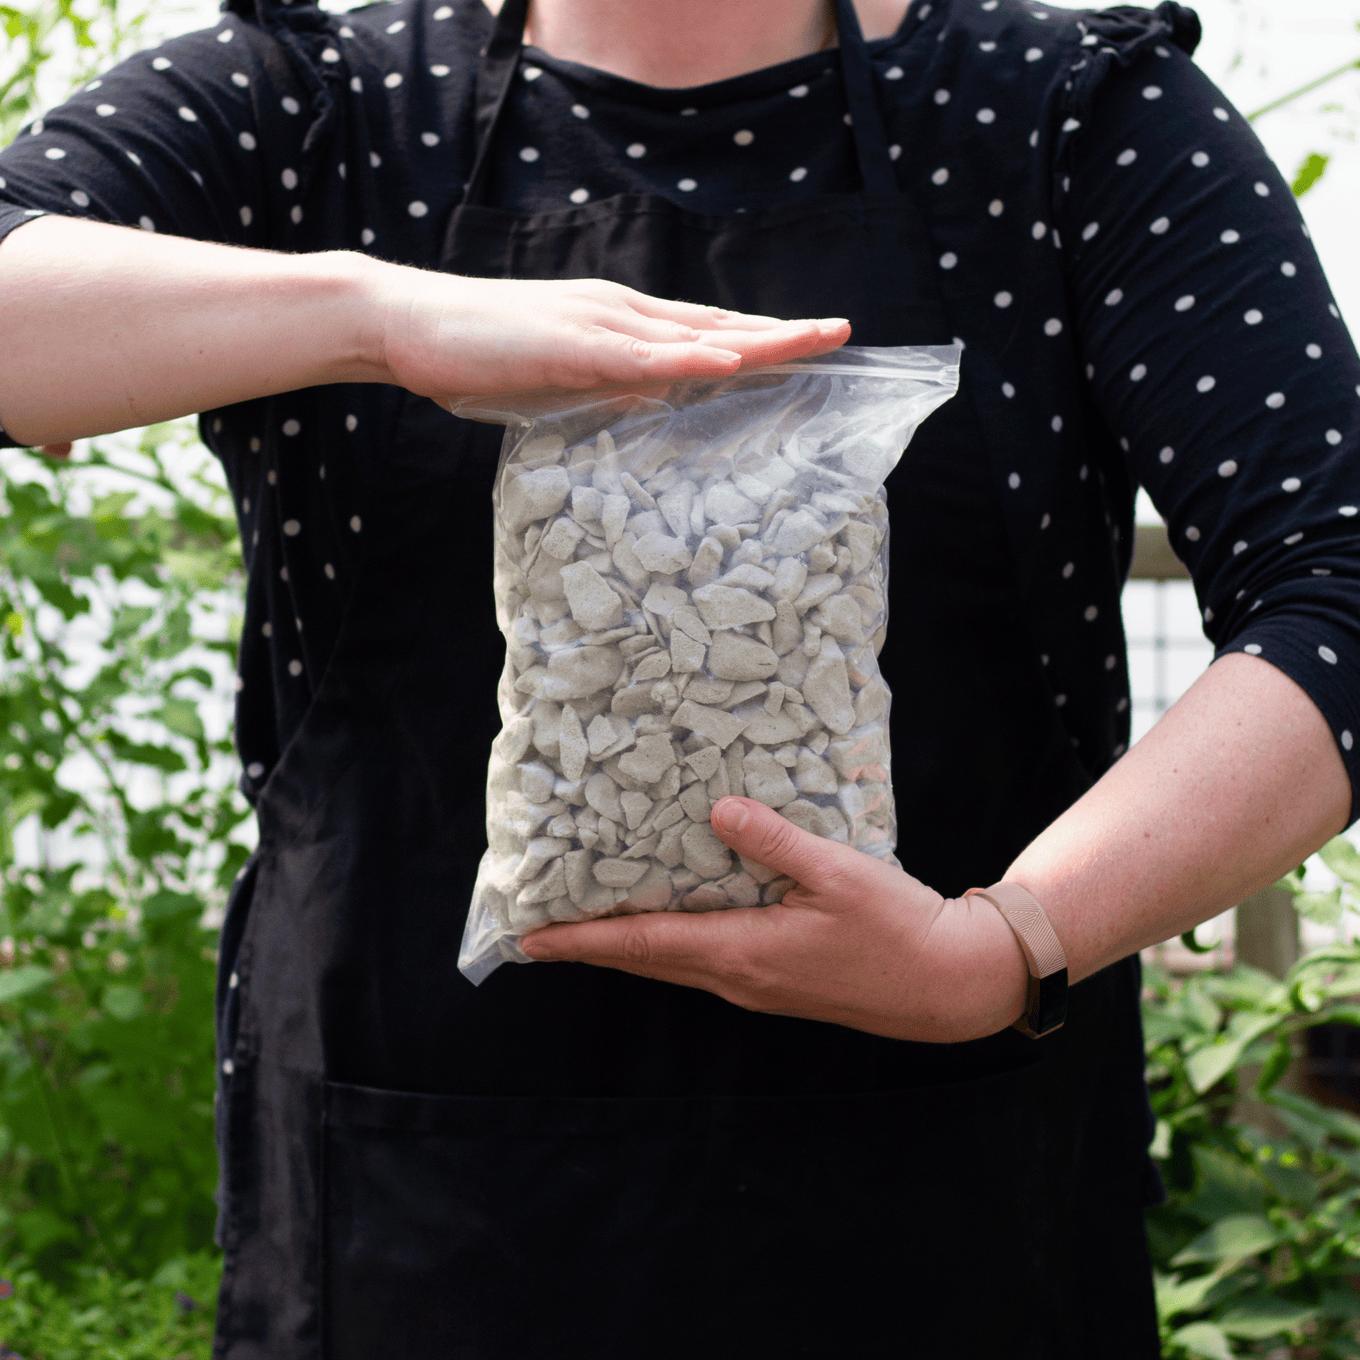 Size reference for soilless growing bag. For reference a gardener is holding the bag in front of their torso. Bag weighs roughly 1lb.